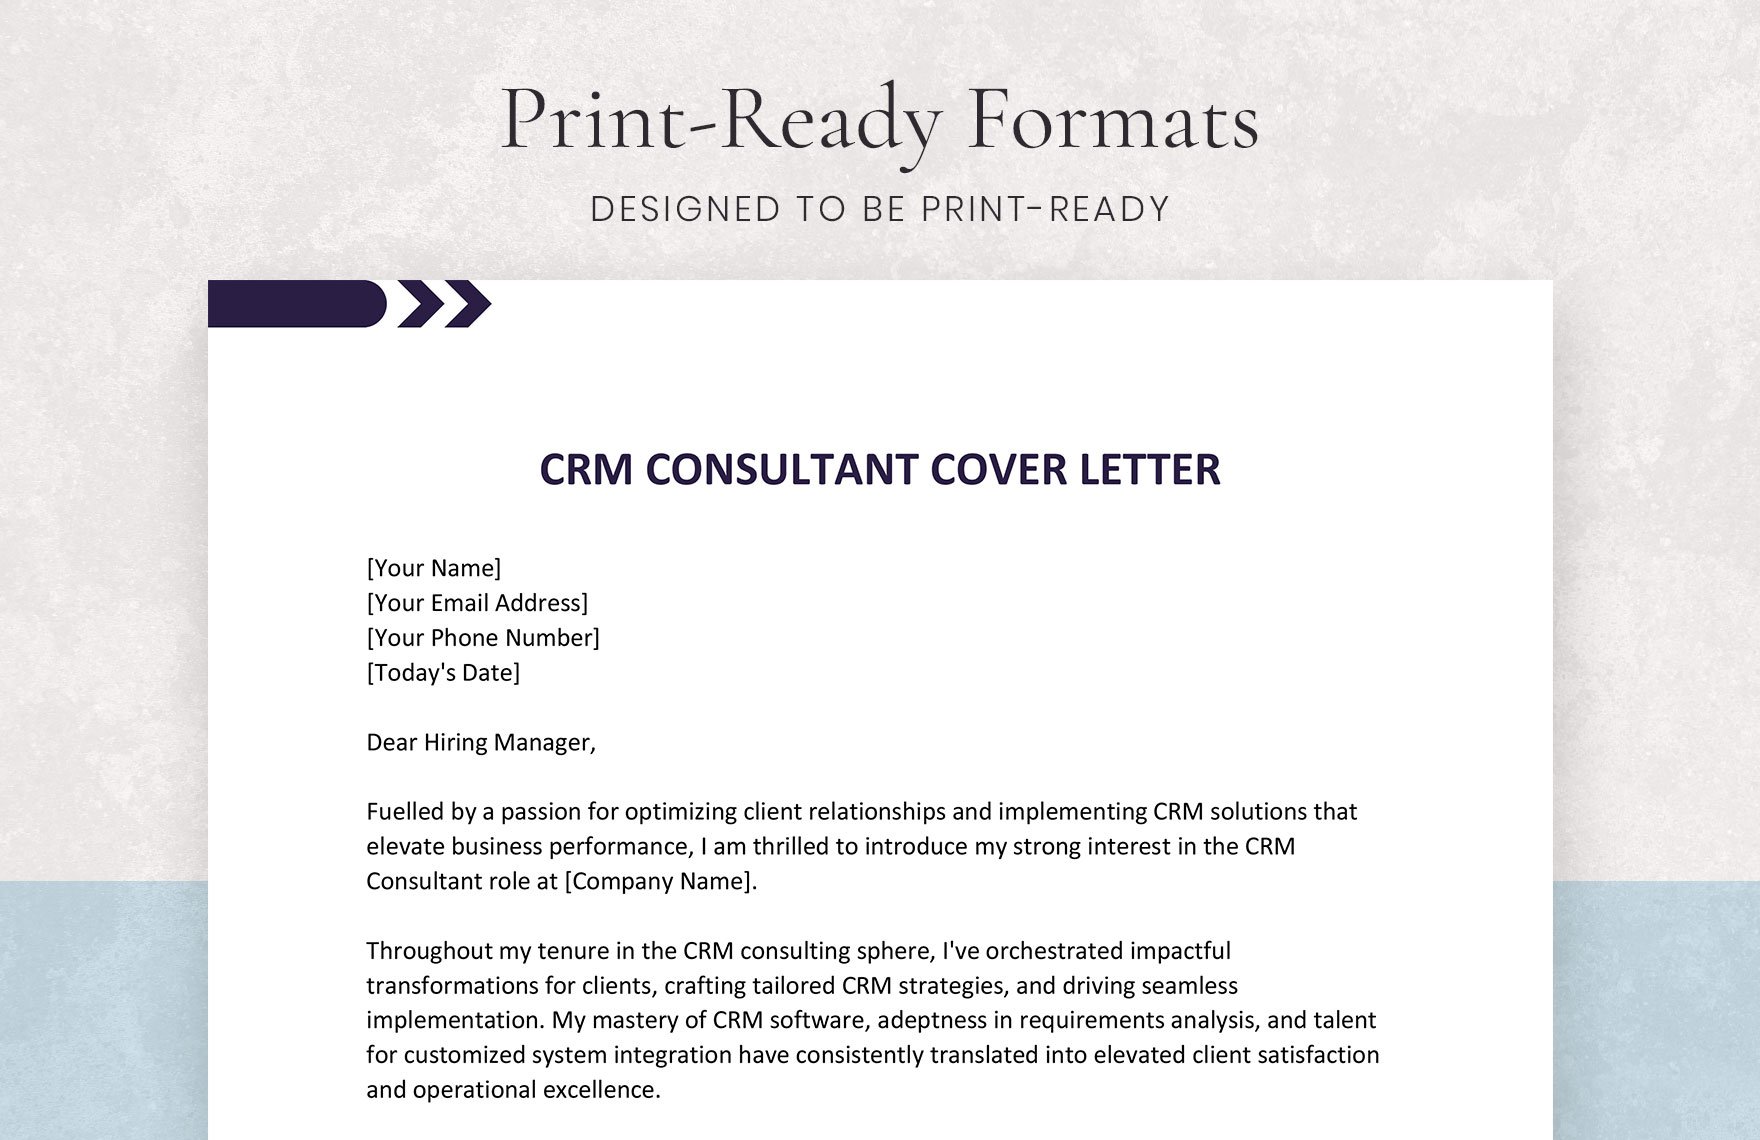 CRM Consultant Cover Letter